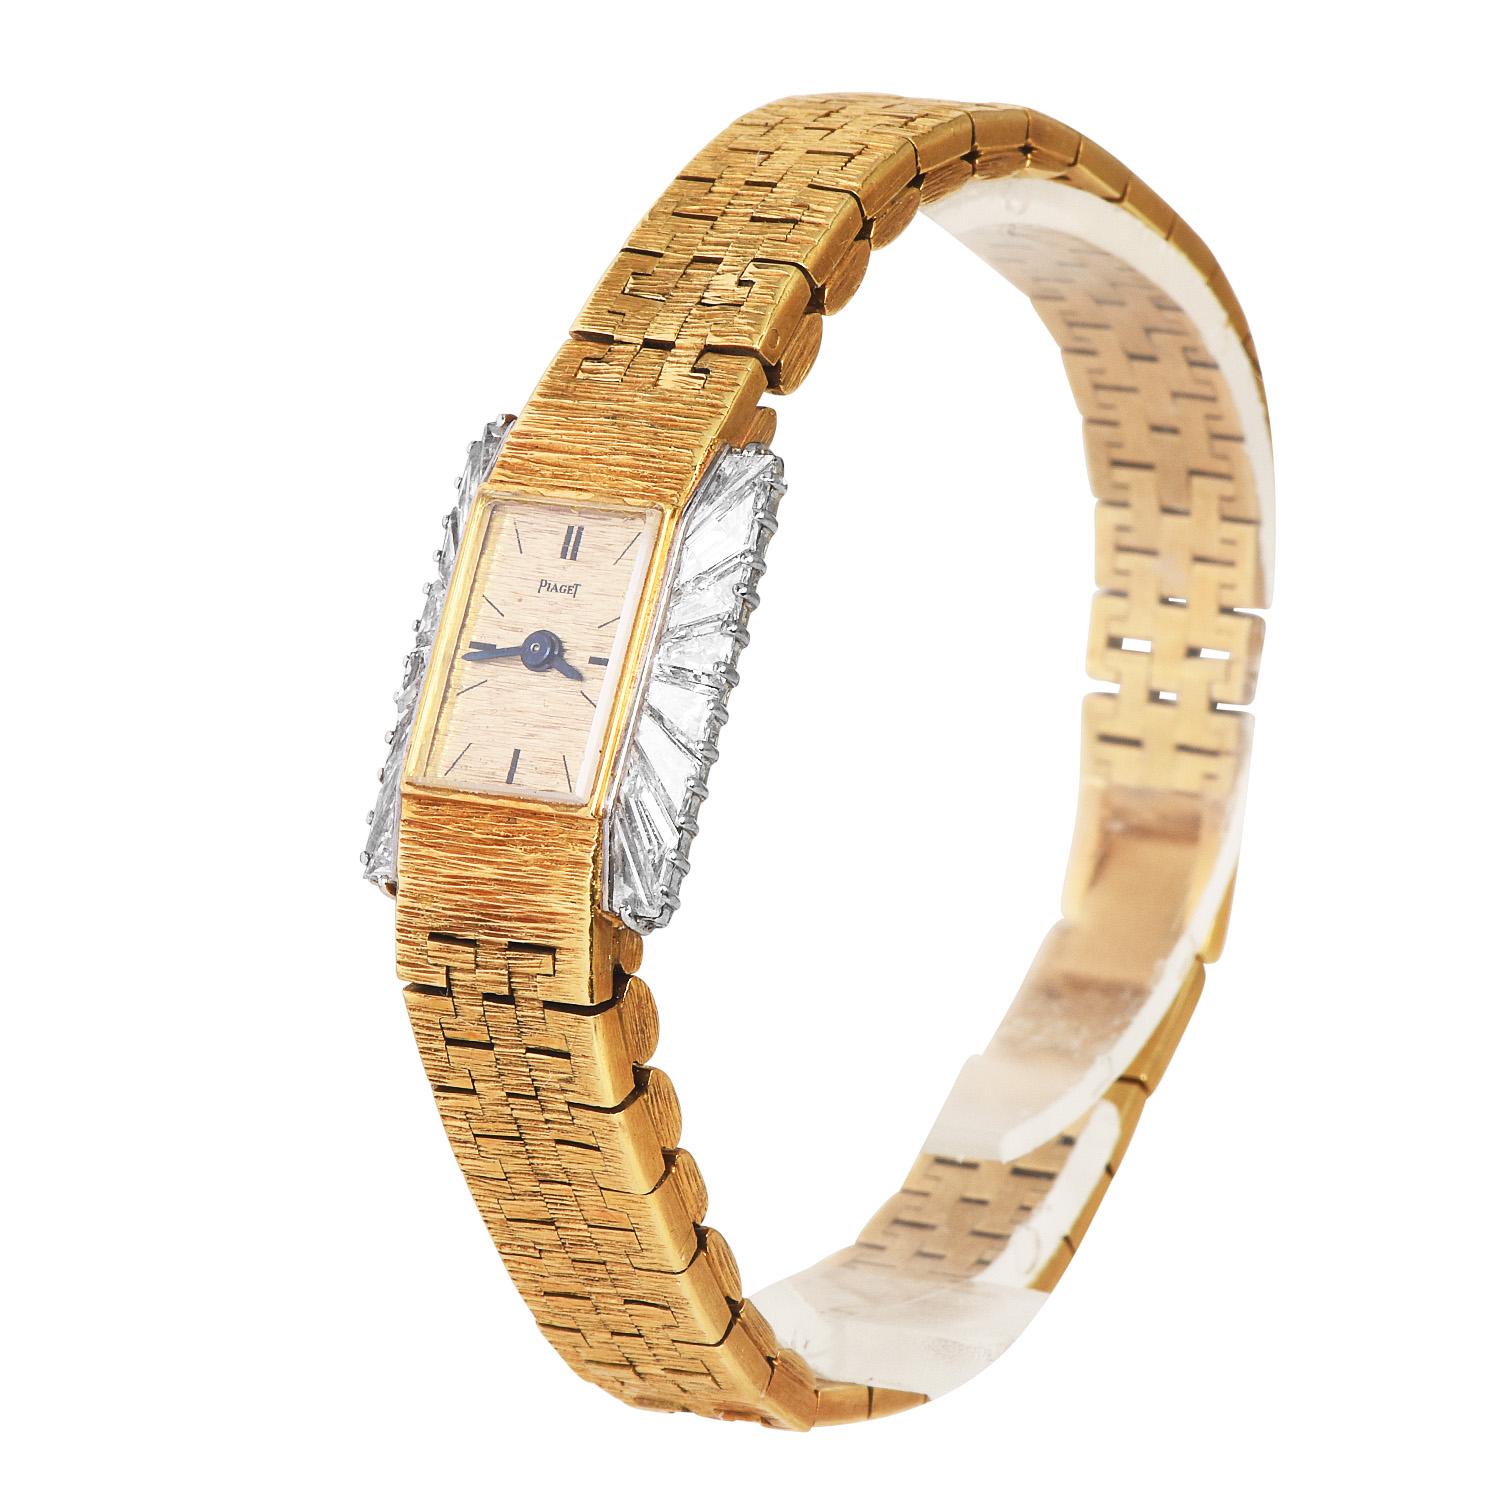 Unique Vintage Piaget LAdies wristwatch. A highly collectible piece, for a delicate and elegant wrist.
Crafted completely in 18k yellow gold, with white gold accents. Gold dial With Piaget back winder mechanical movement.
Enhanced by 18 Baguette-cut